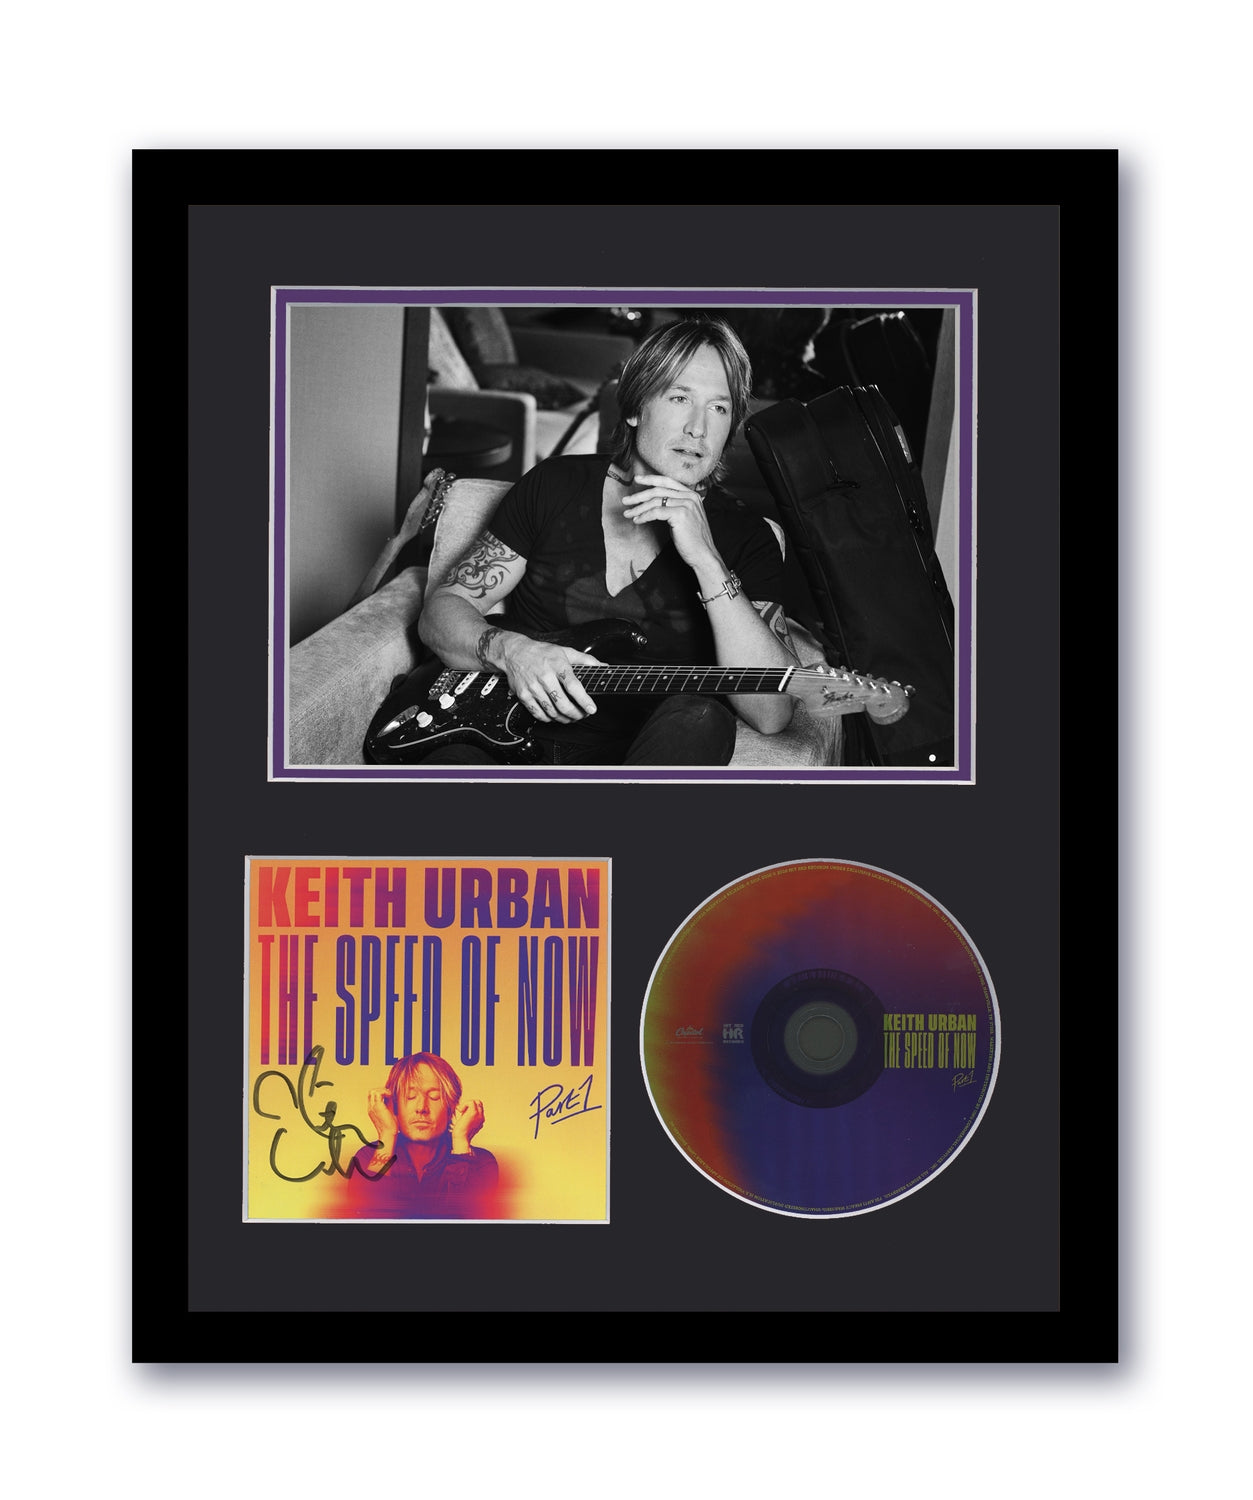 Keith Urban Autographed Signed 11x14 Framed CD Speed Of Now ACOA 7